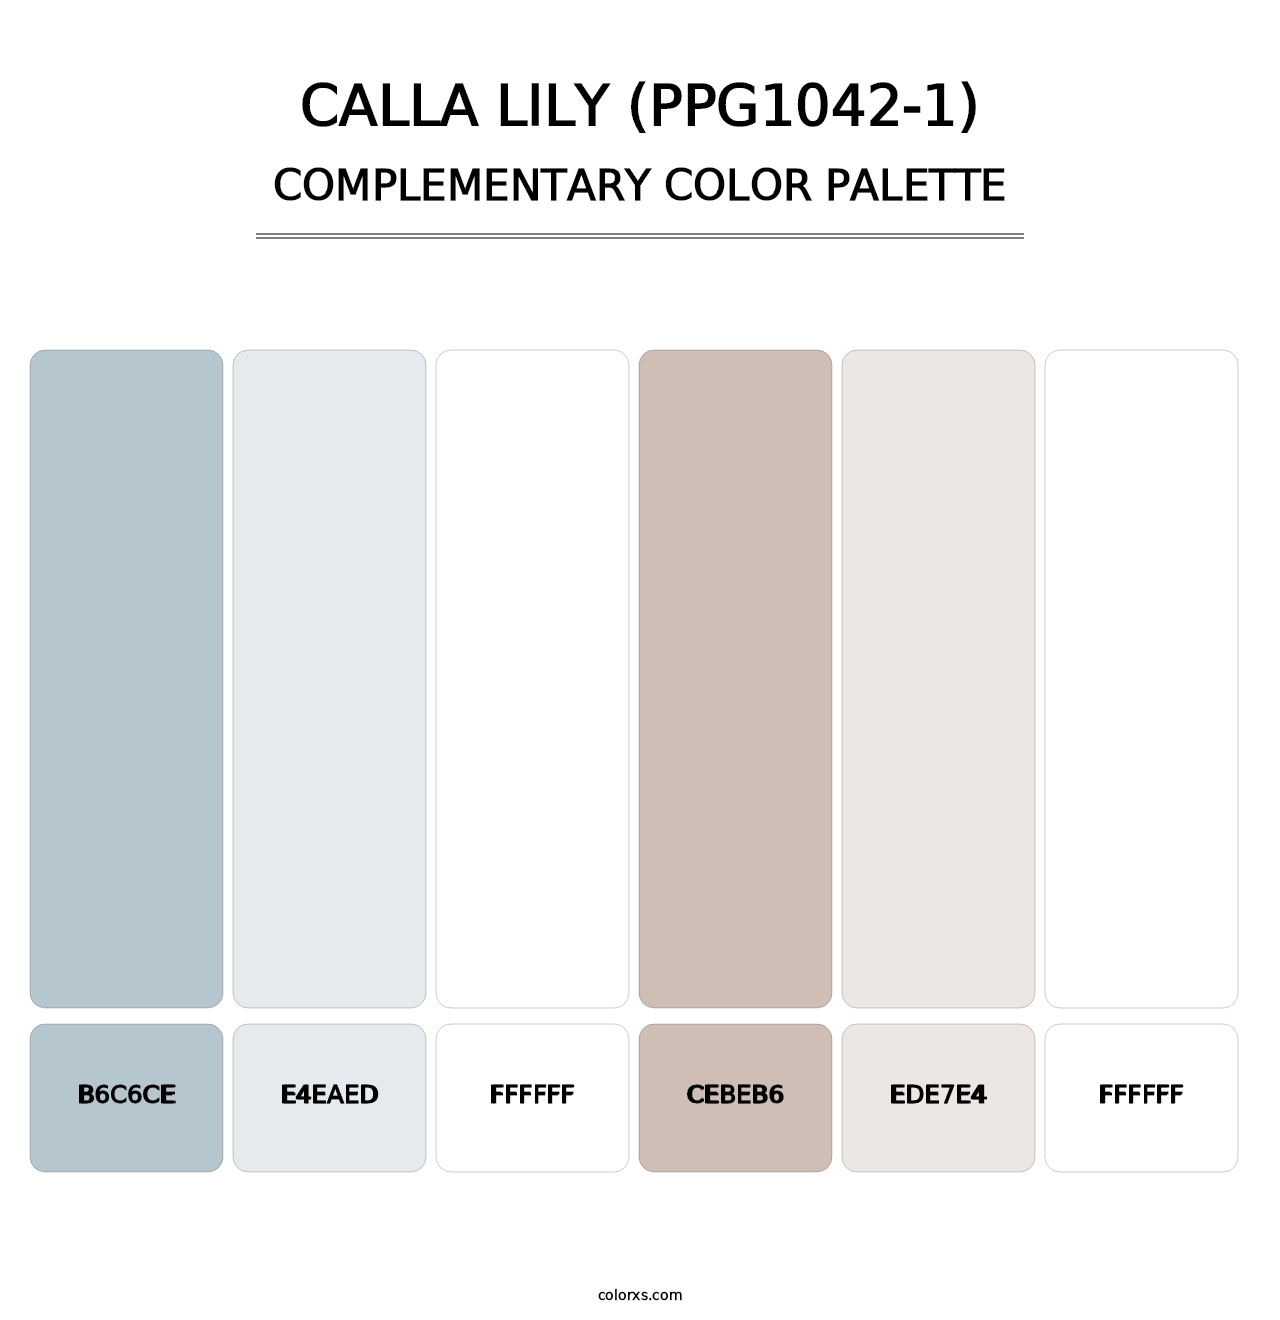 Calla Lily (PPG1042-1) - Complementary Color Palette